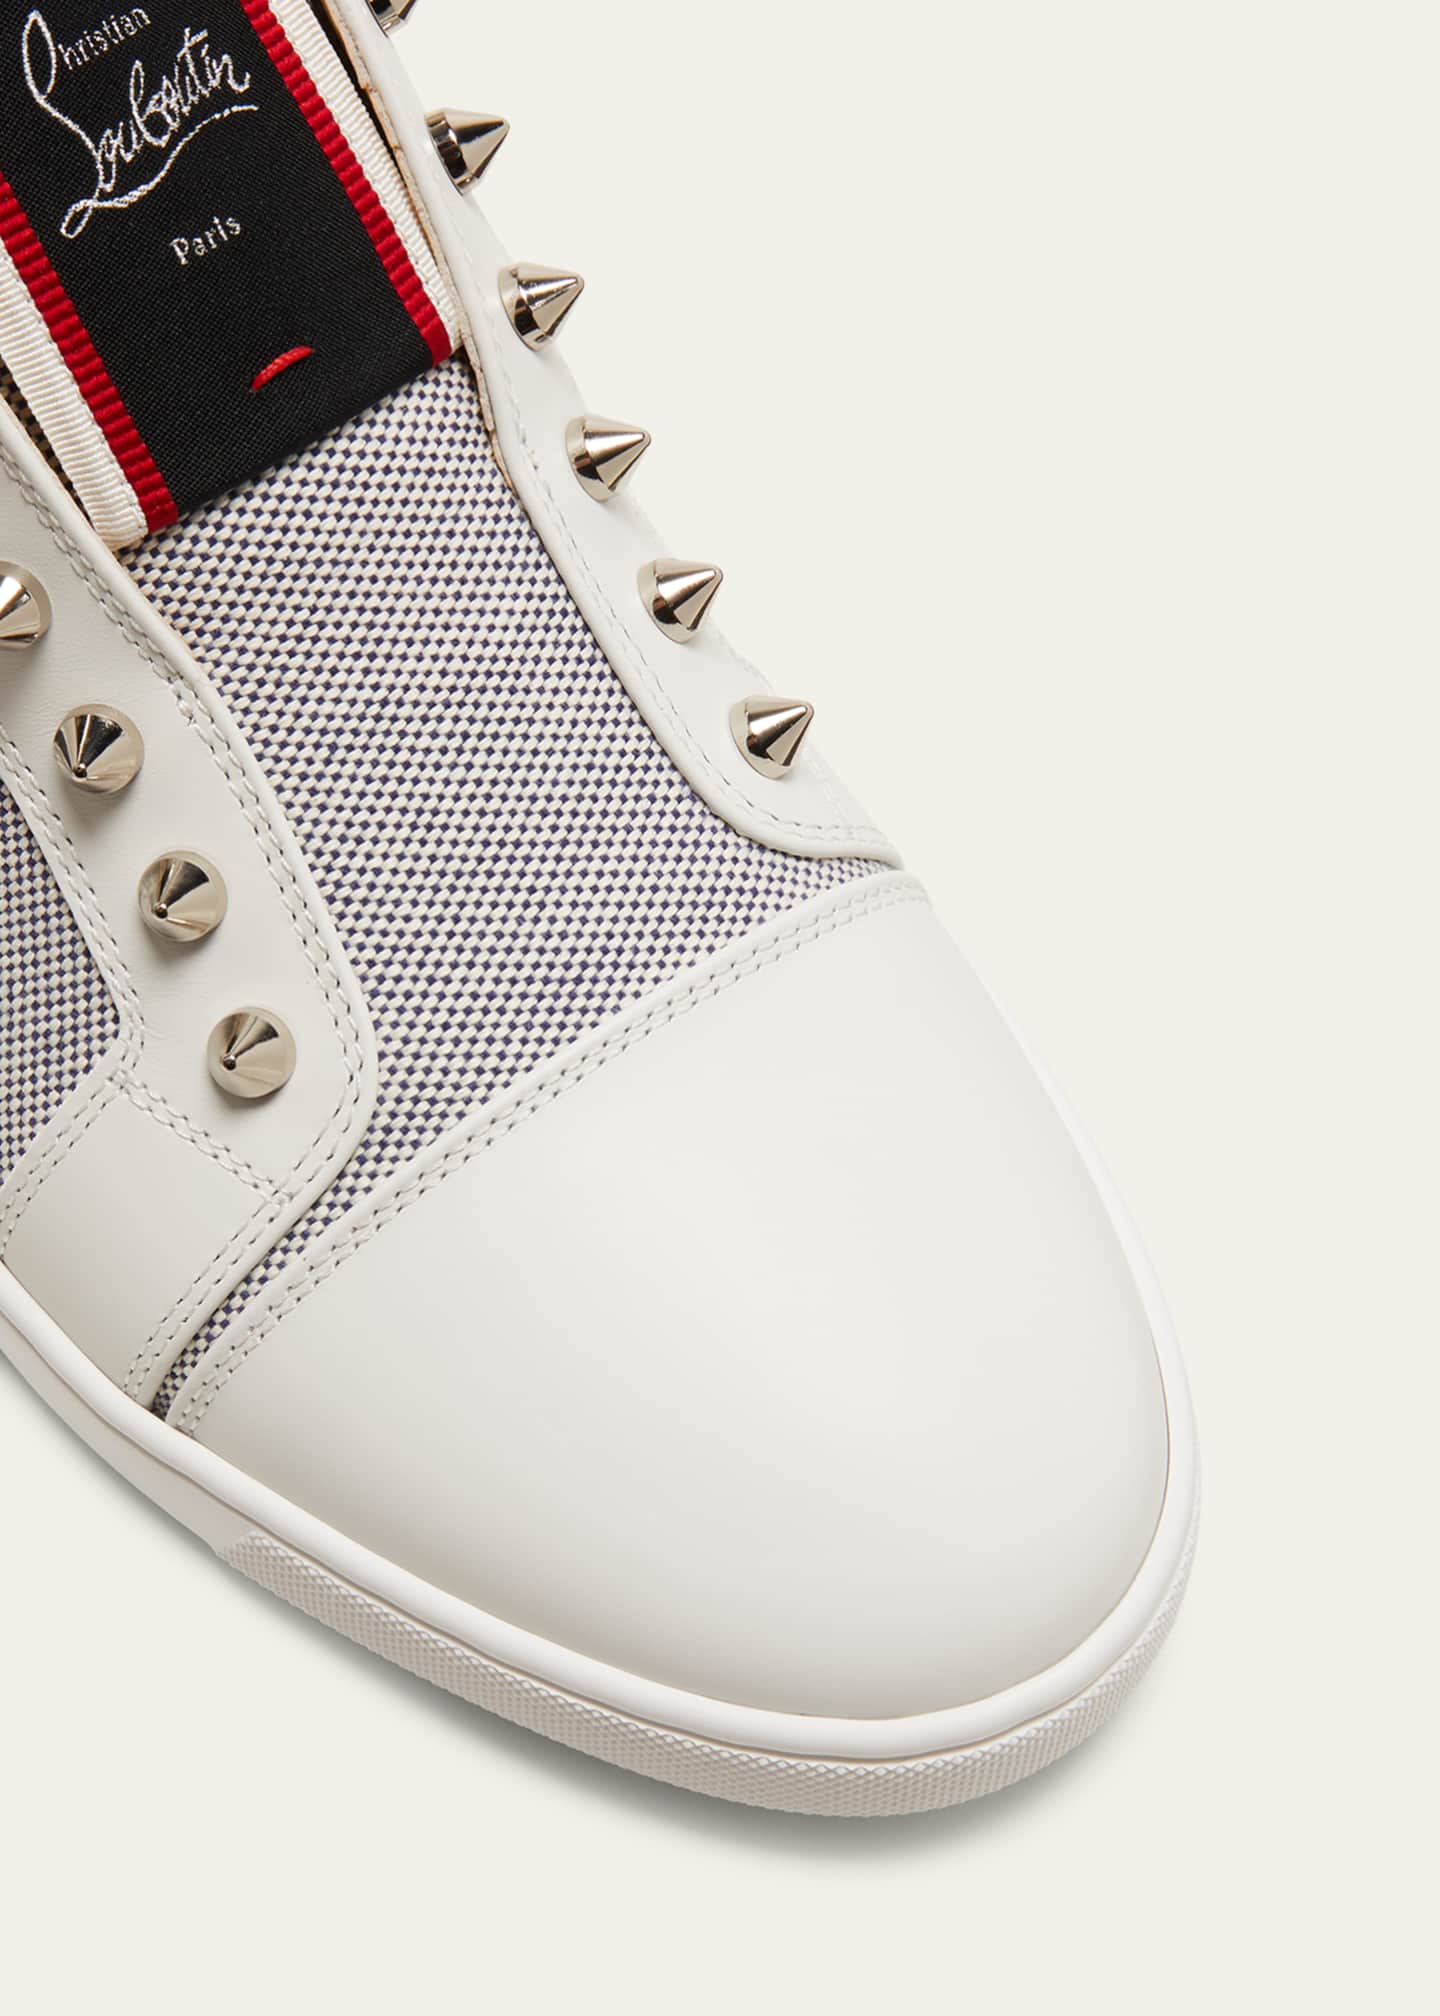 Christian Louboutin F.A.V. Fique A Vontade Sneakers